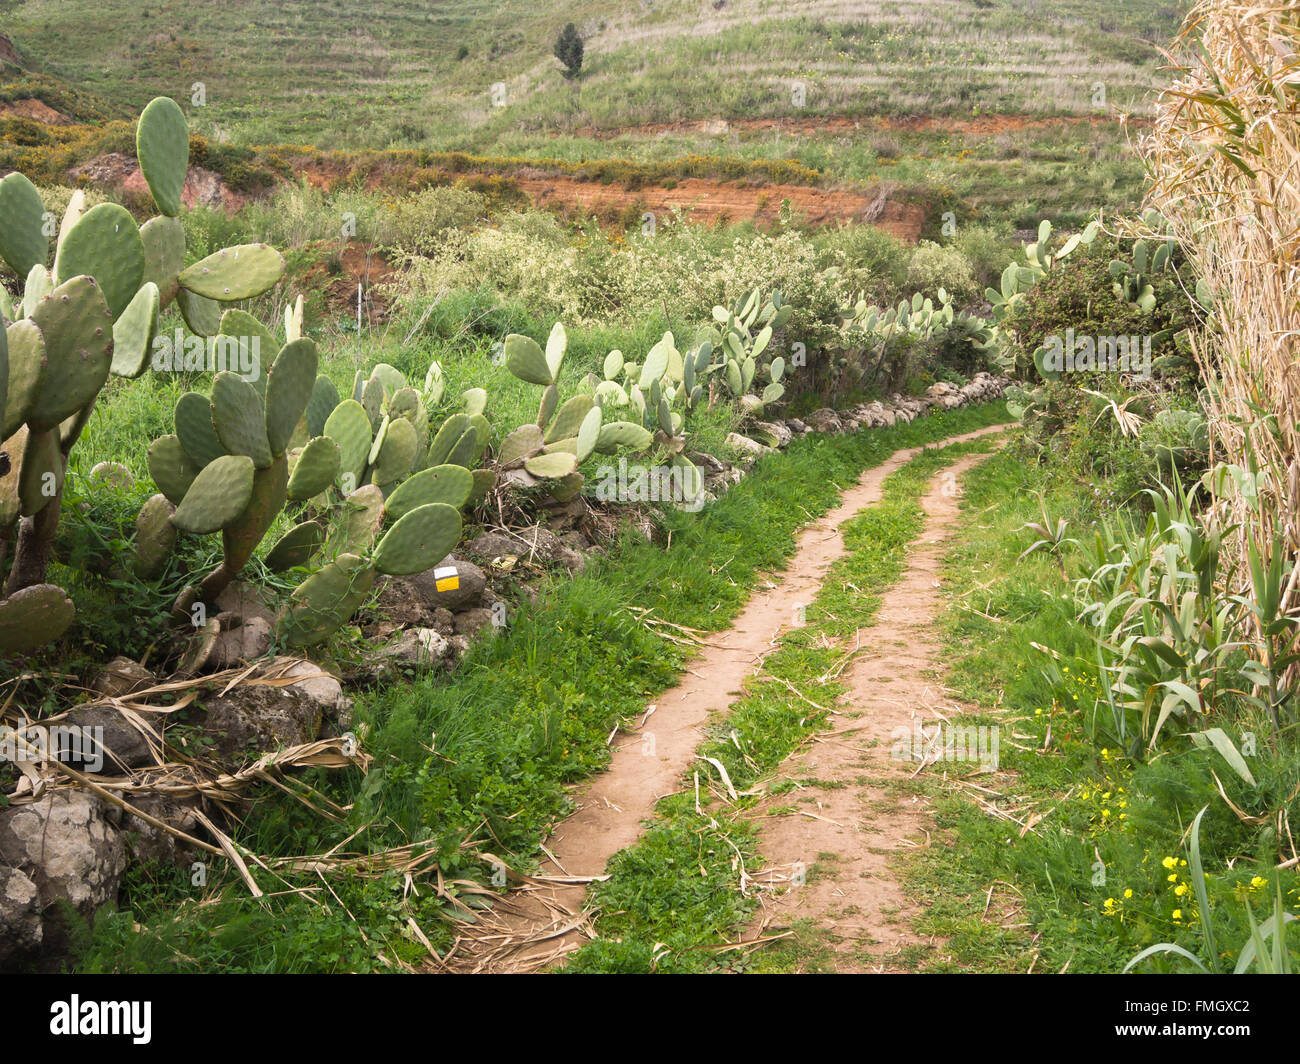 Prickly pear Opuntia dillenii , dirt track, footpath markings, landscape in 'Charcas del Erjos' Tenerife Canary Islands Spain Stock Photo